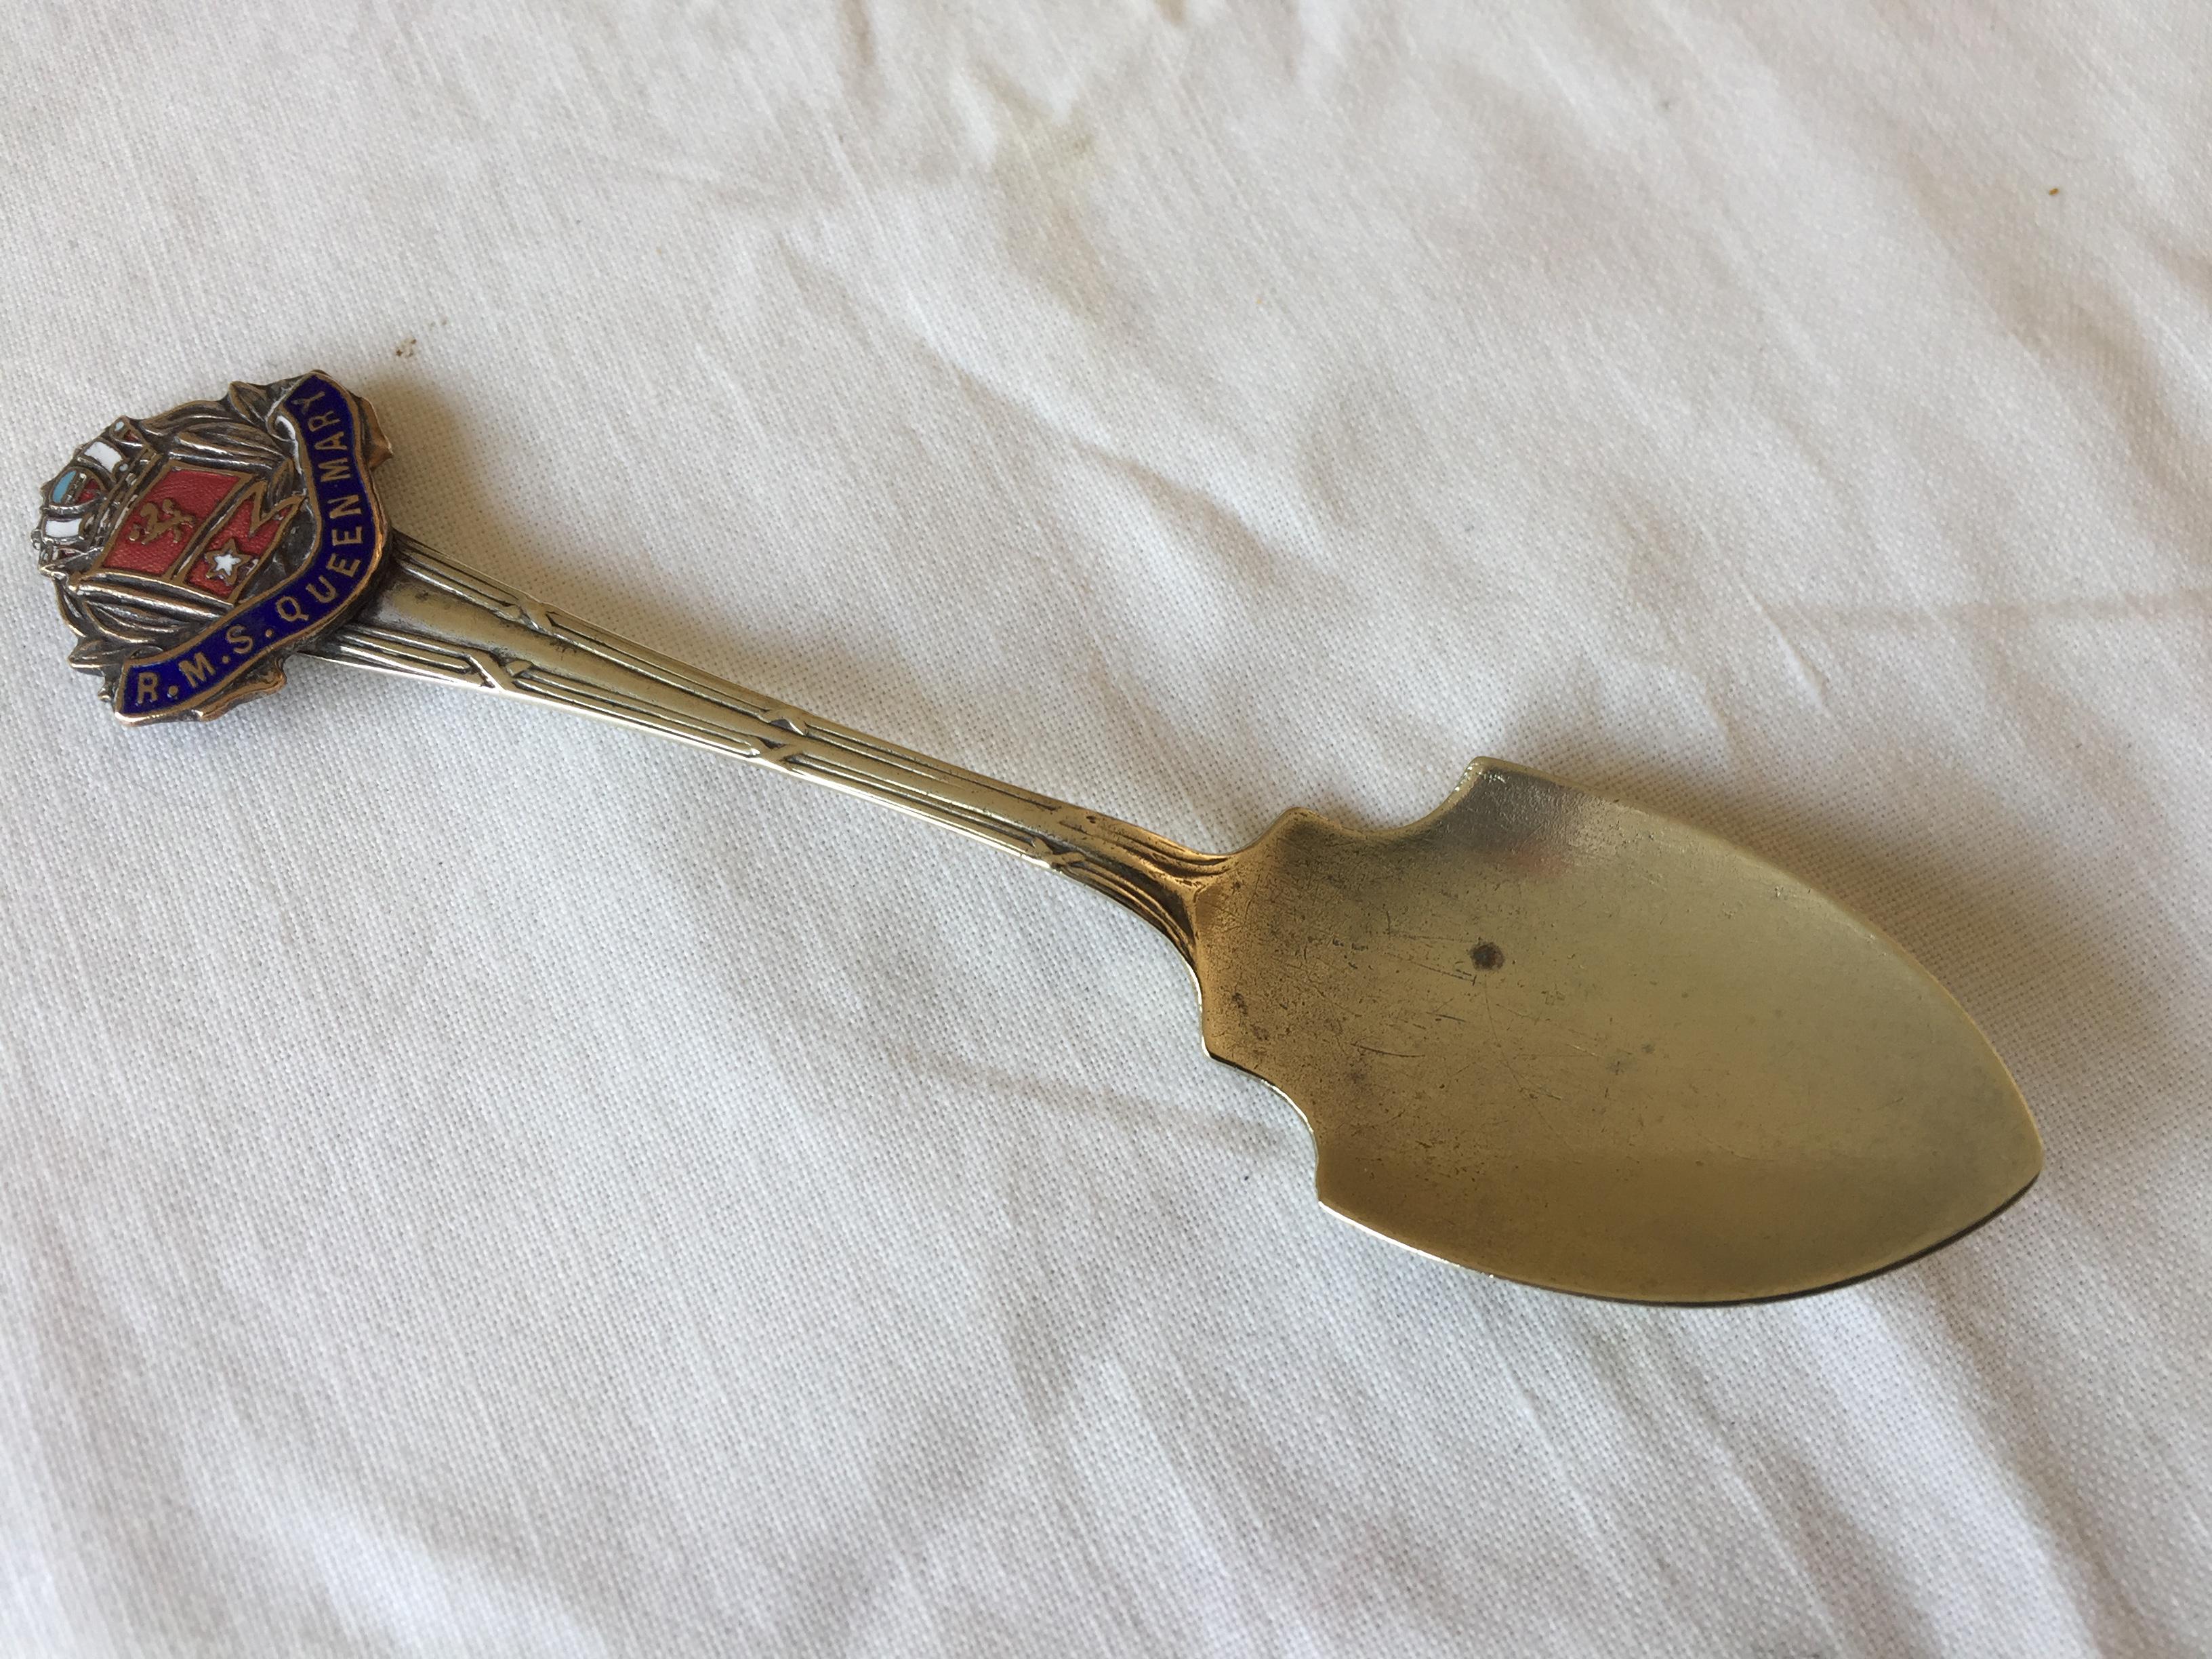 EARLY SOUVENIR SPOON FROM THE FAMOUS OLD VESSEL THE RMS QUEEN MARY